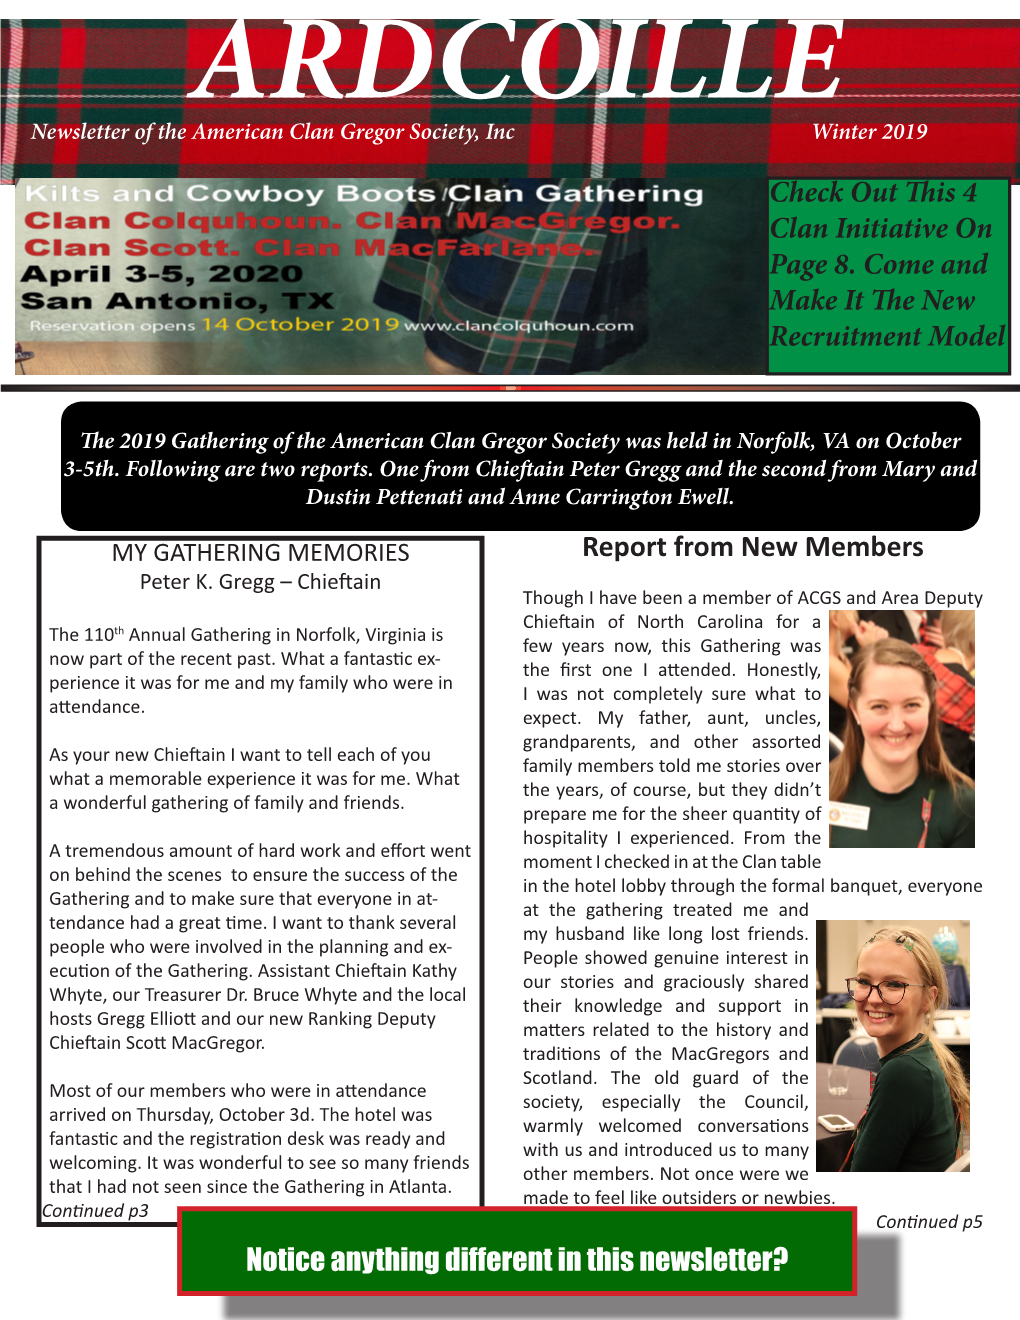 Report from New Members Notice Anything Different in This Newsletter?